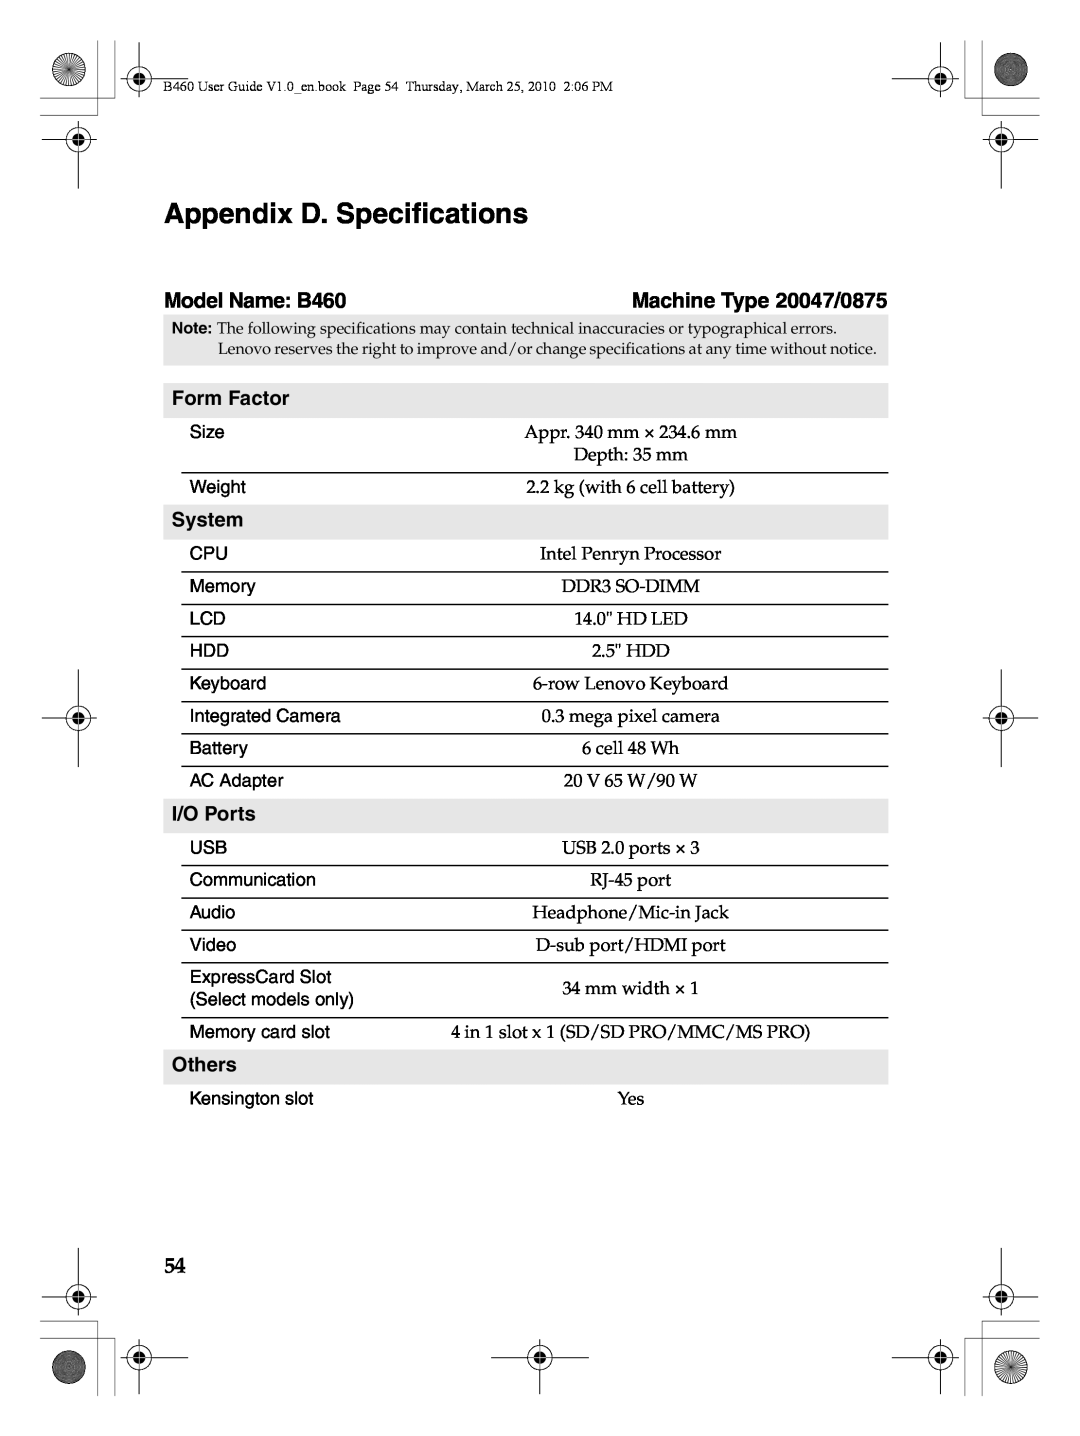 Lenovo Appendix D. Specifications, Model Name B460, Machine Type 20047/0875, Form Factor, System, I/O Ports, Others 